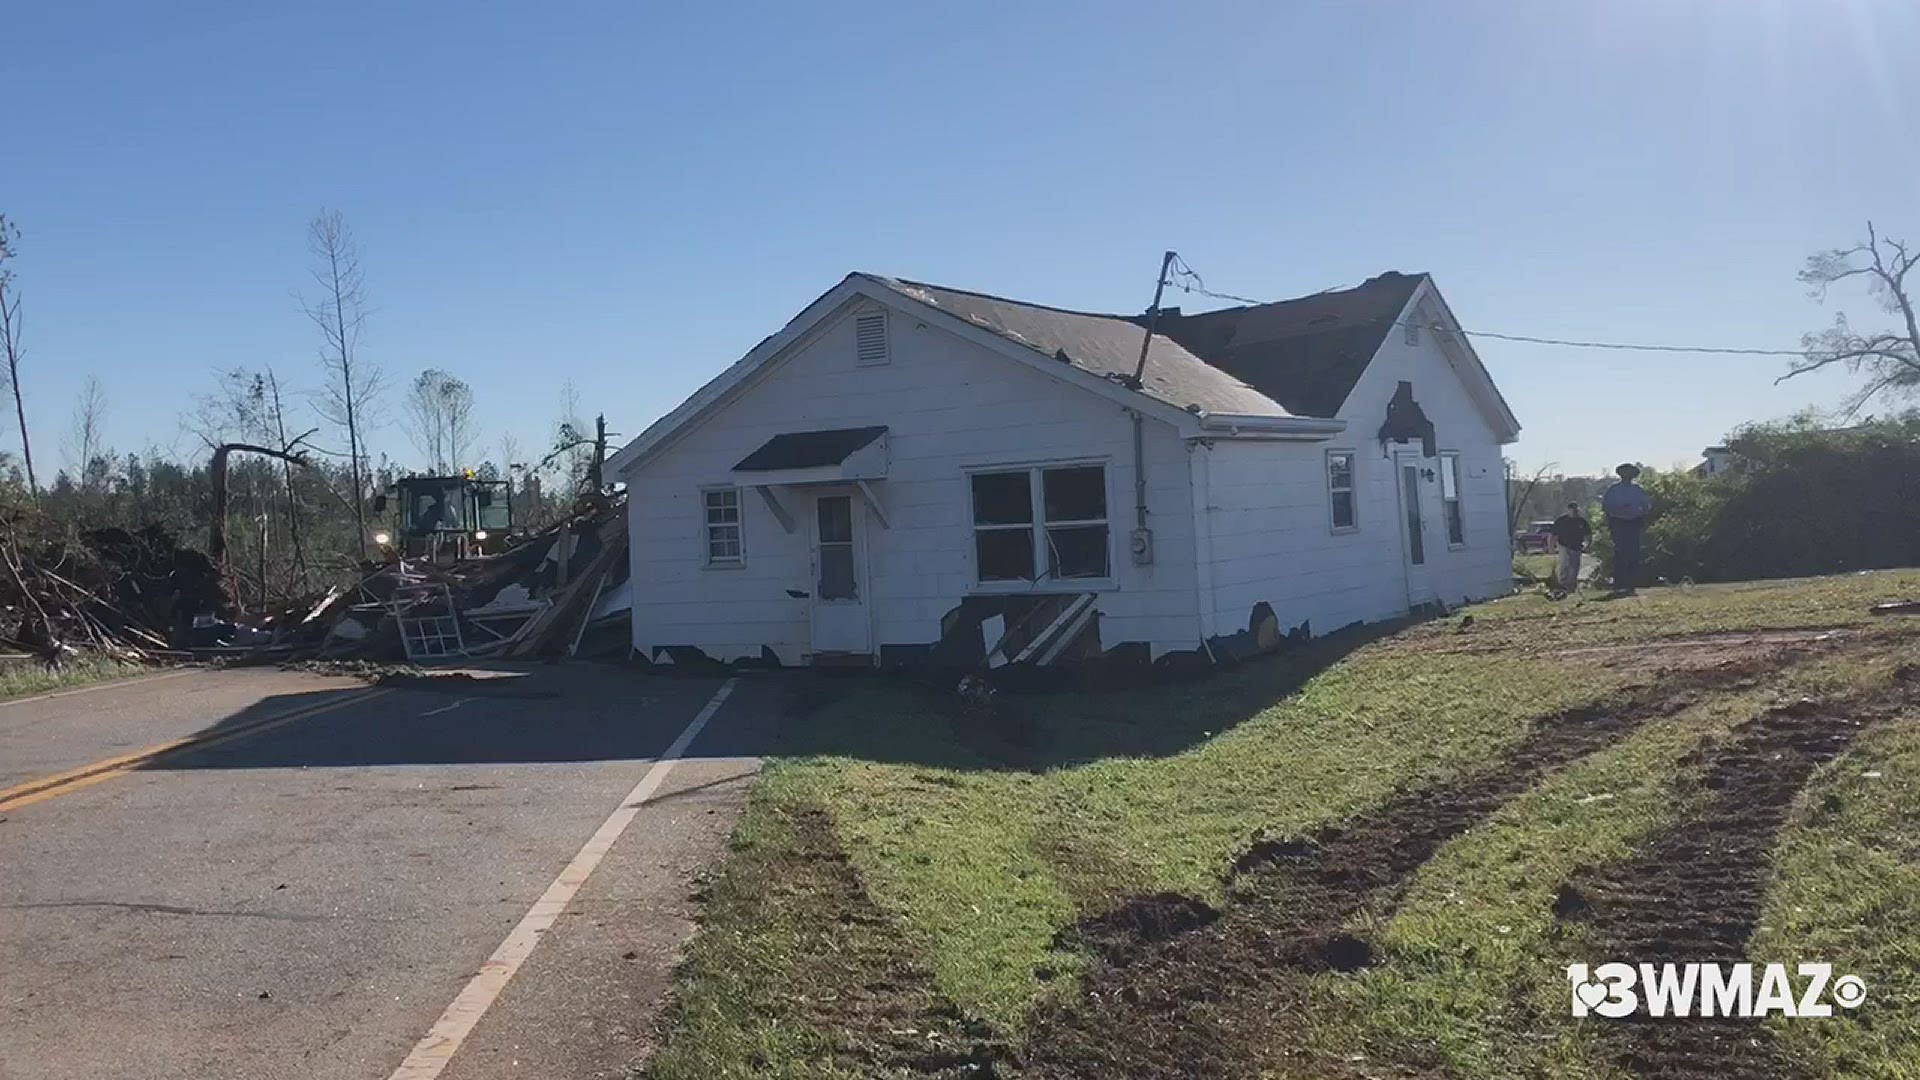 A home was completely moved by a storm on GA-74 in Upson County early Monday morning. A possible tornado touched down in the area.